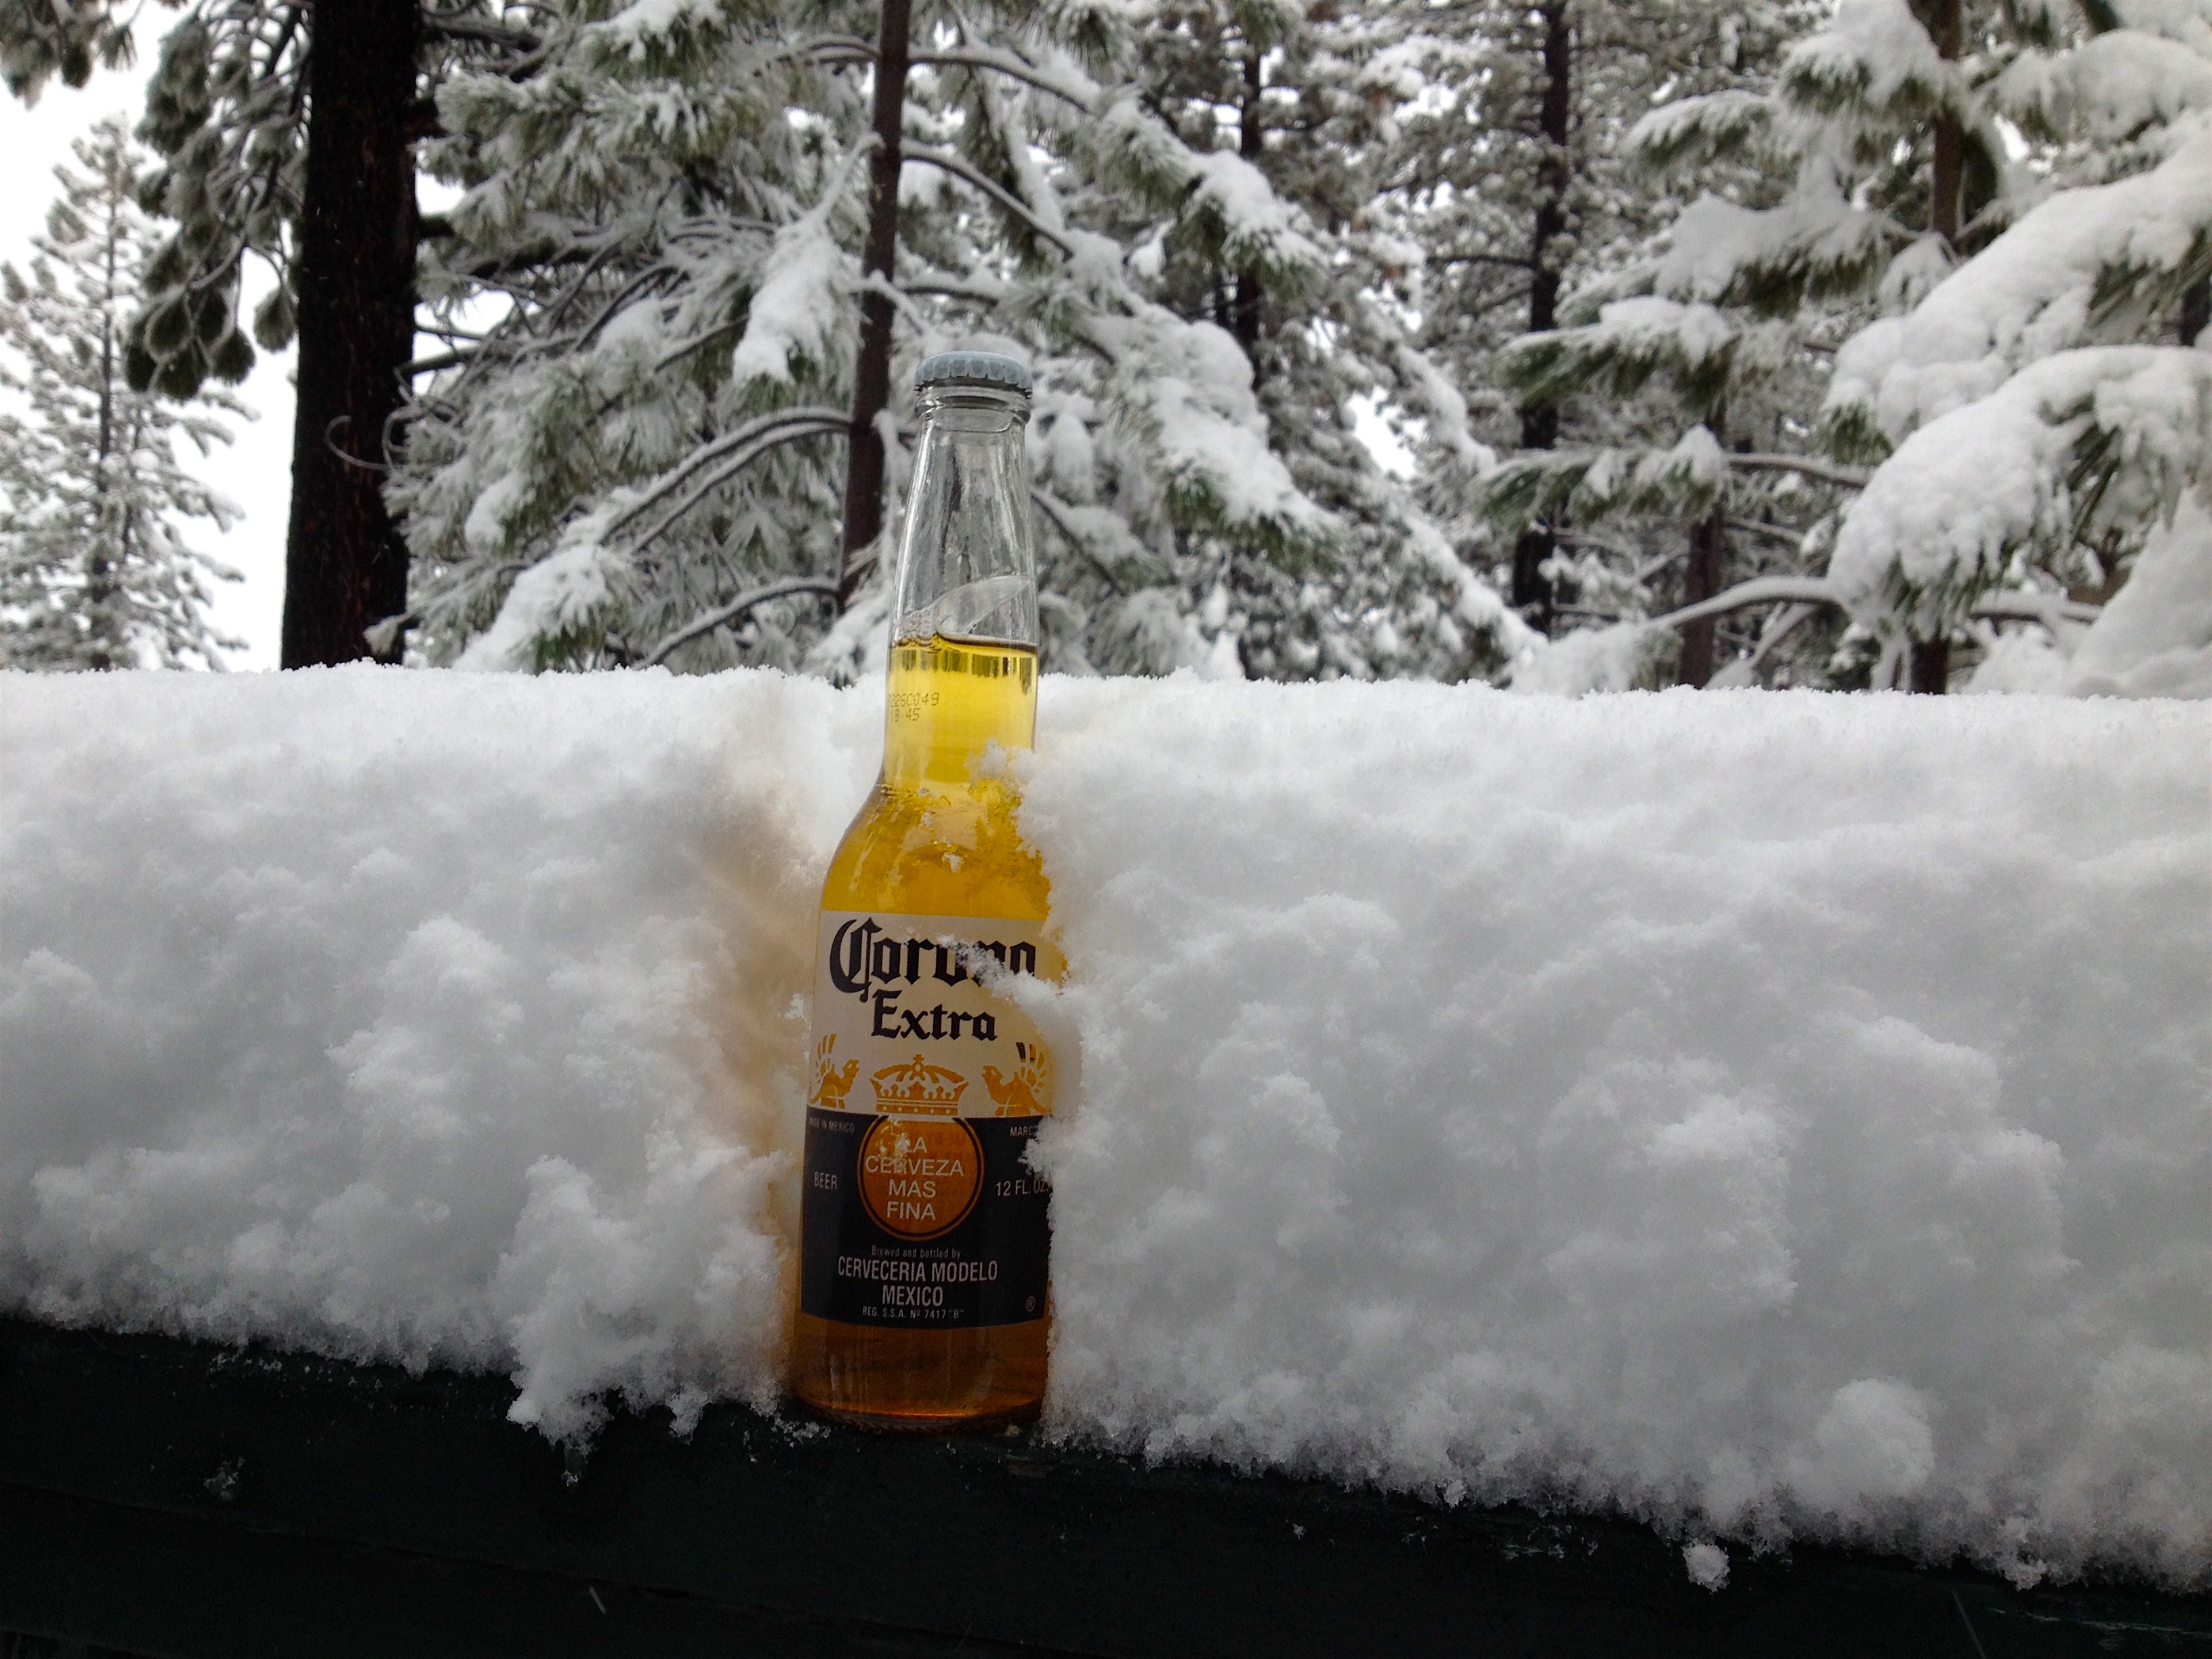 It was Corona deep at 4pm in Squaw. Same railing as shown above, just 4 hours later and 5" deeper. photo: snowbrains